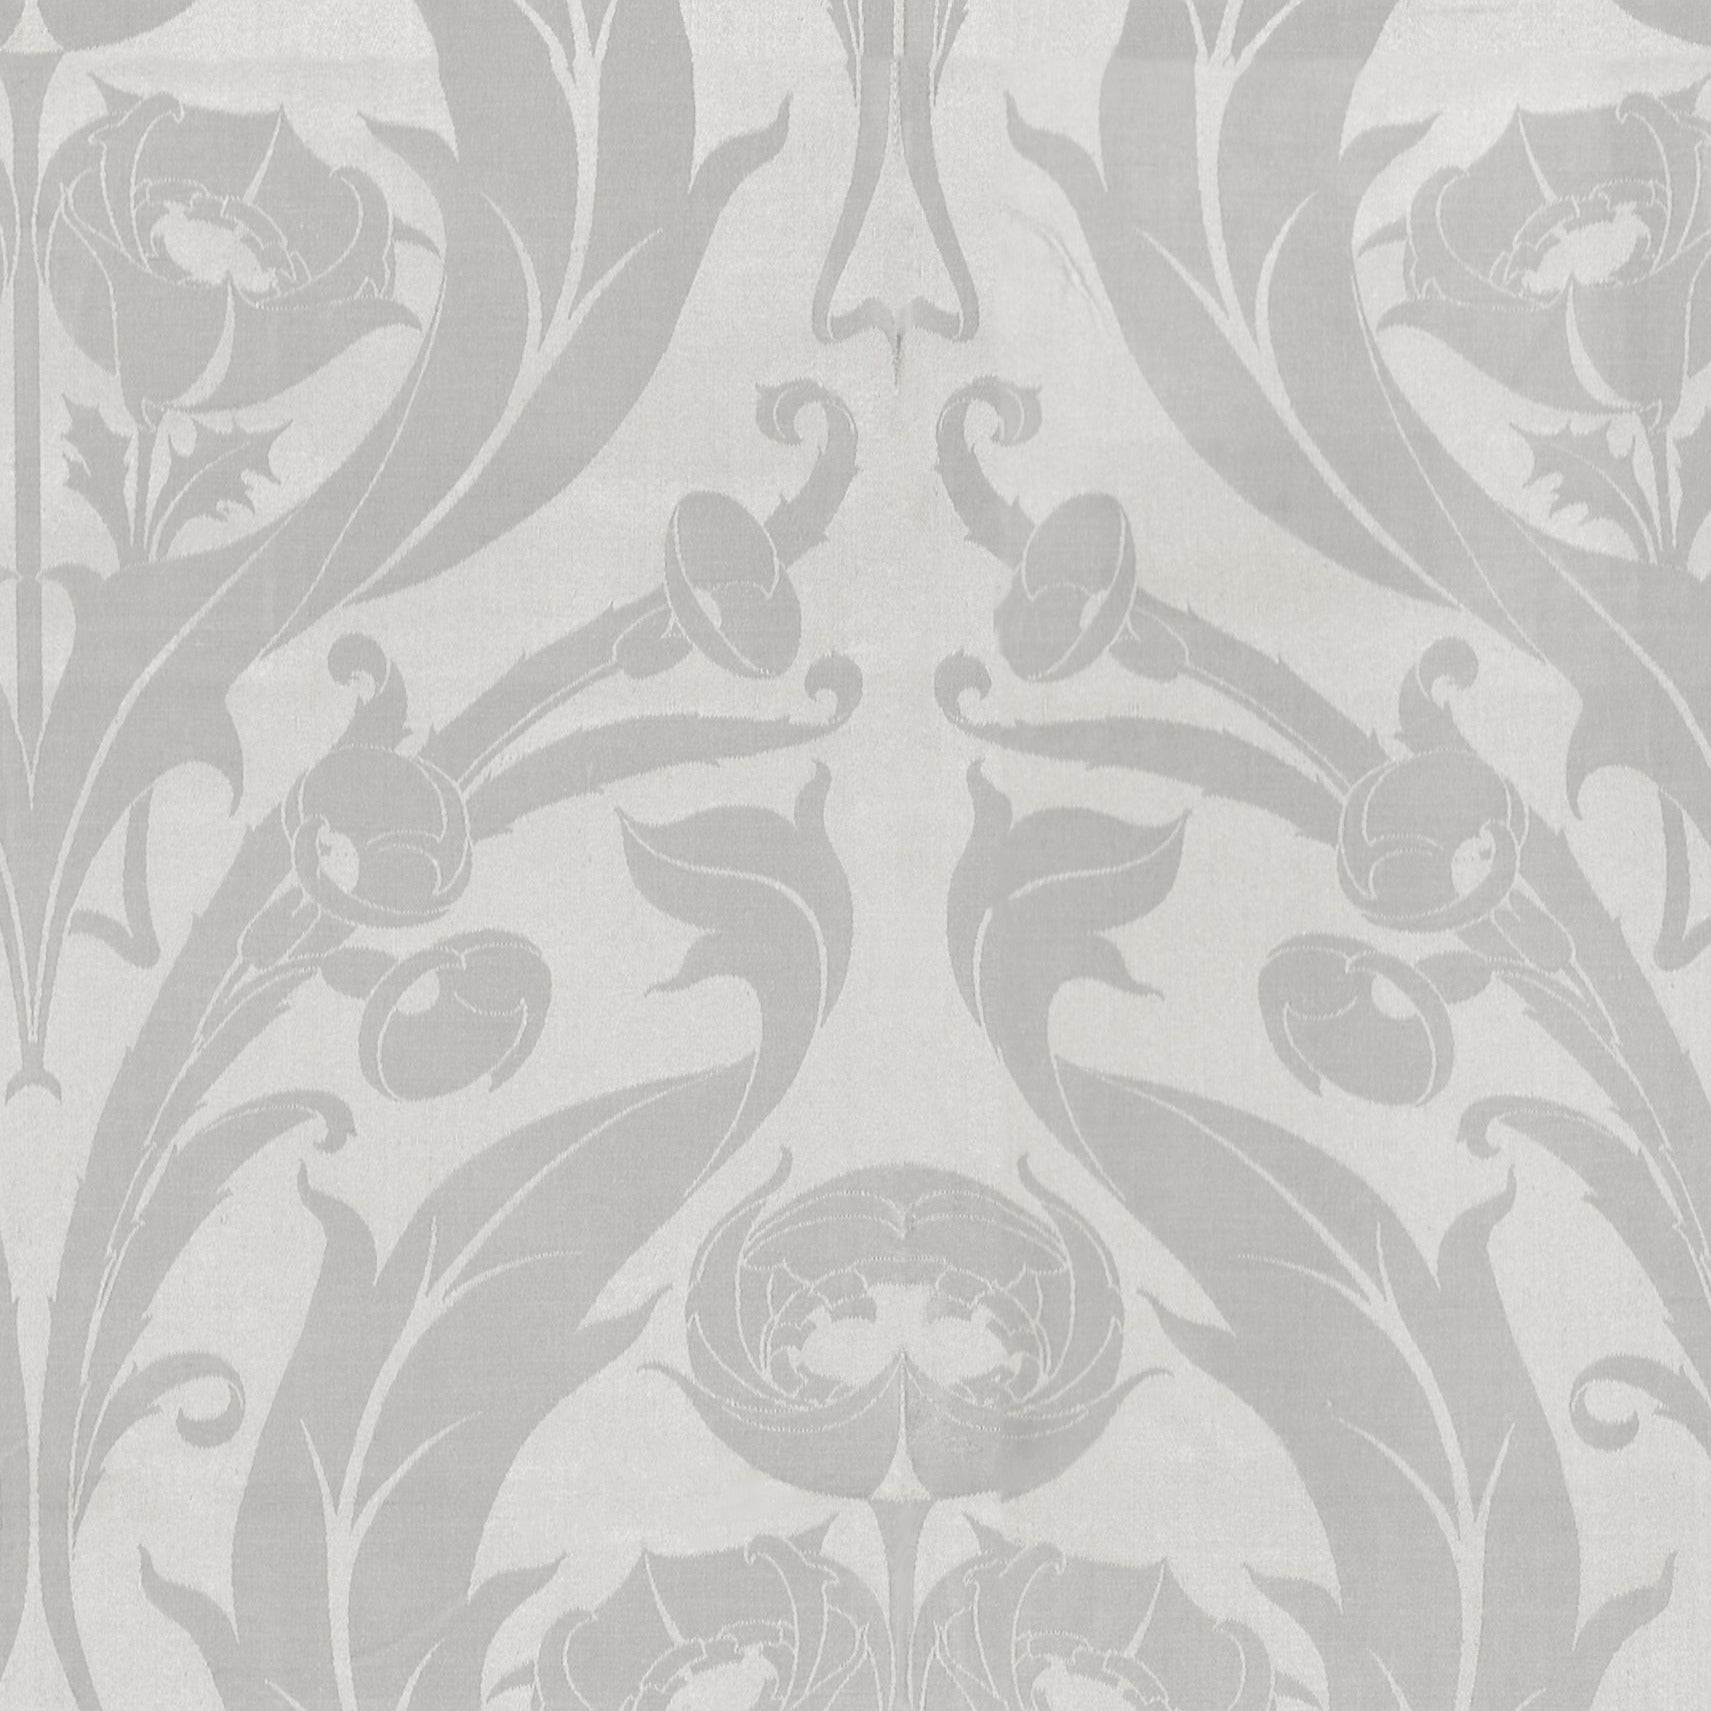 A close-up view of the Regal Elegance Wallpaper displaying its intricate floral pattern in shades of gray on a white background. The wallpaper features detailed flowers and ornamental leaves, providing a luxurious and refined look suitable for elegant interior settings.